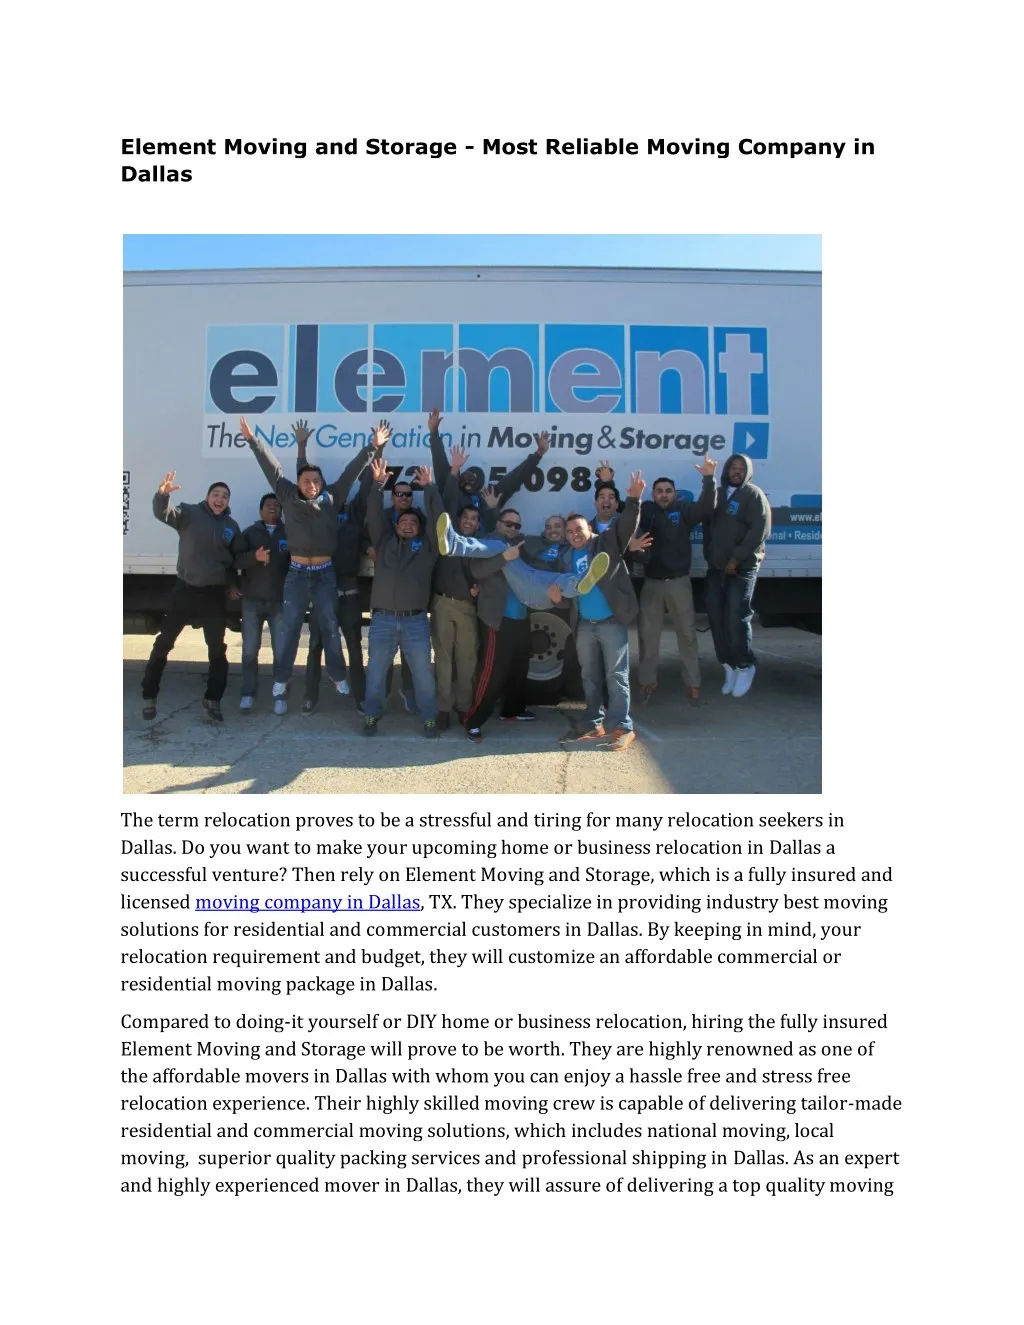 element moving and storage most reliable moving